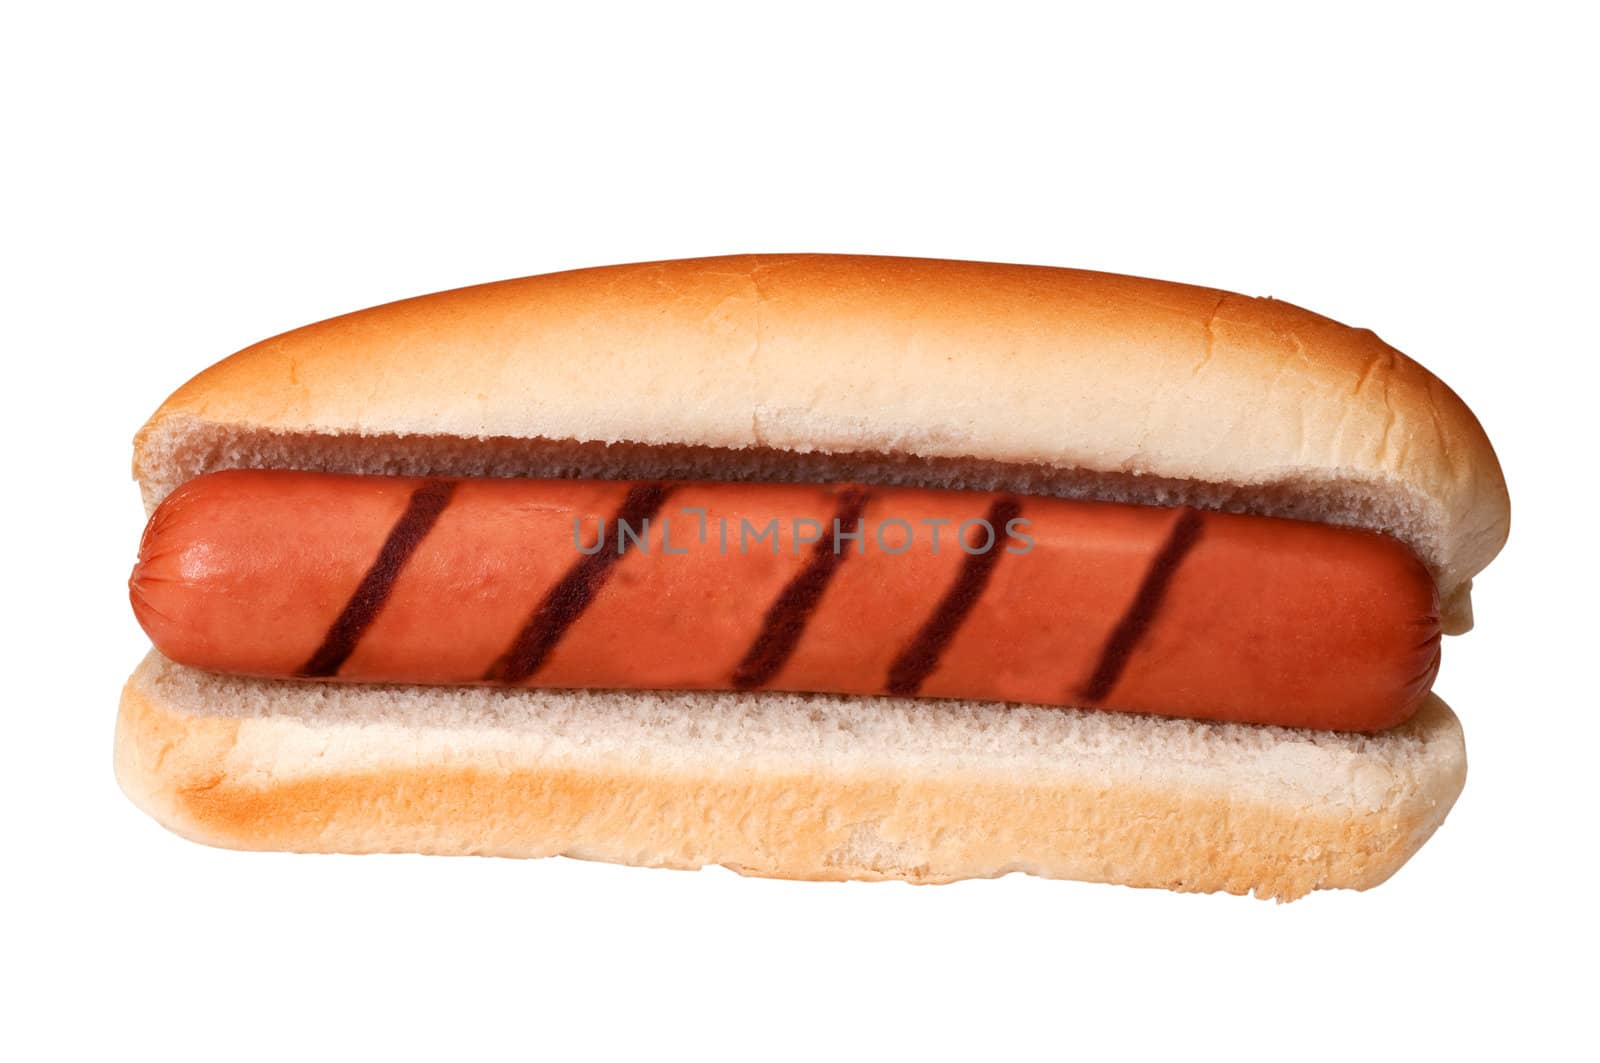 Plain Hot Dog with Grill Marks by dehooks